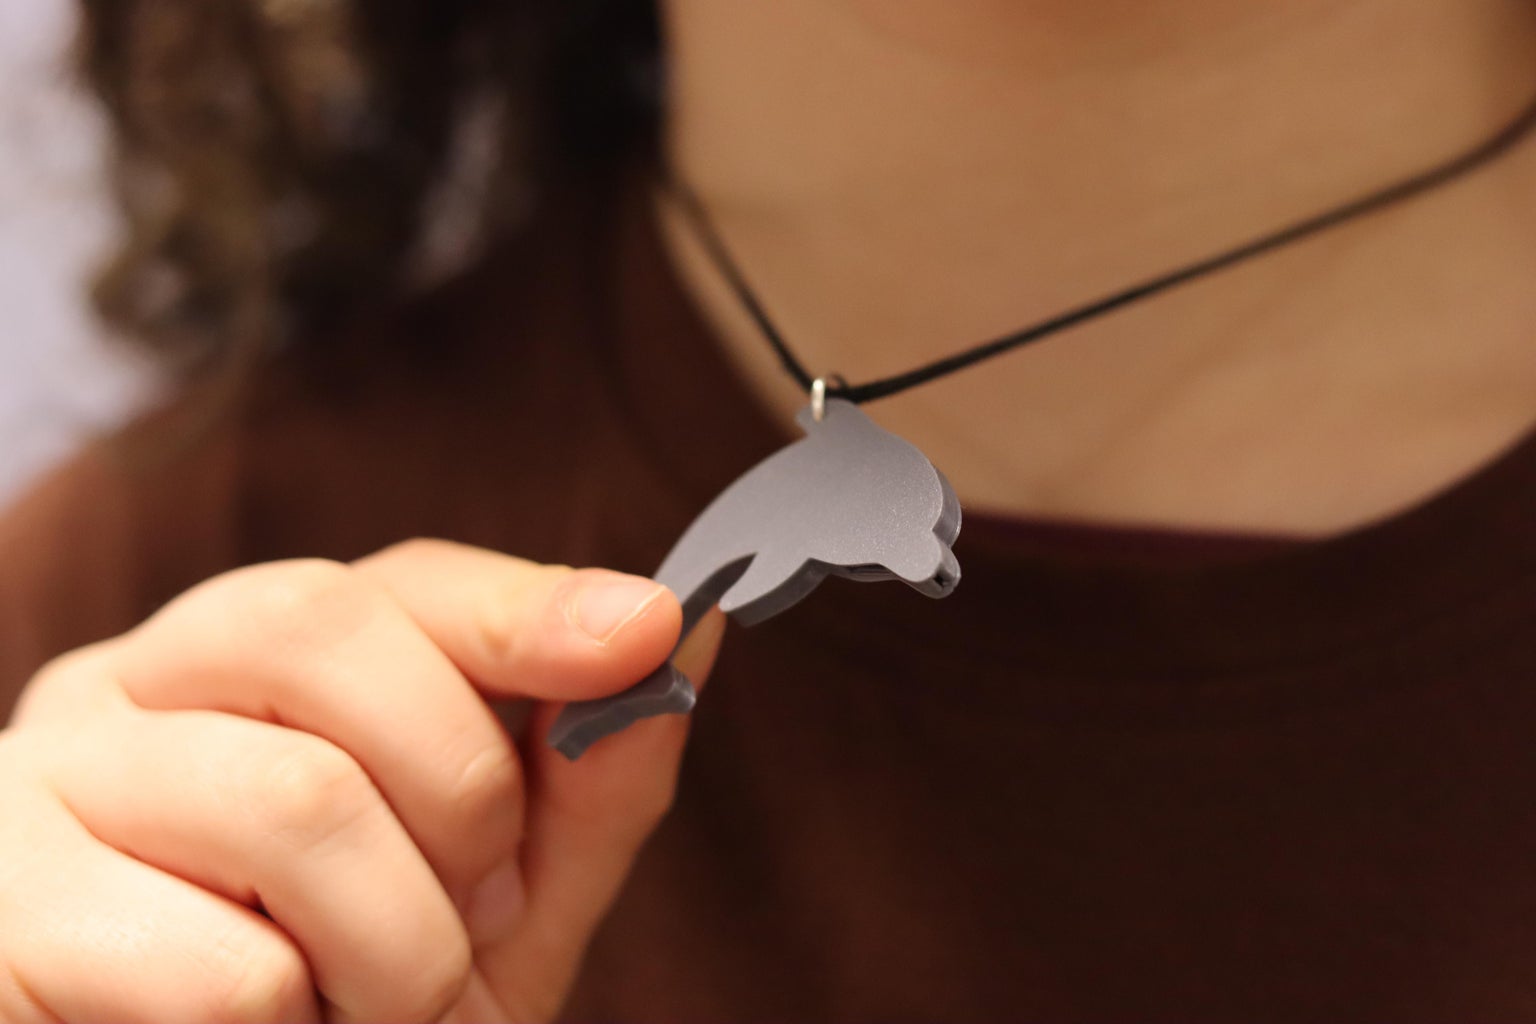 3D Printed Whistle Necklace With Tinkercad